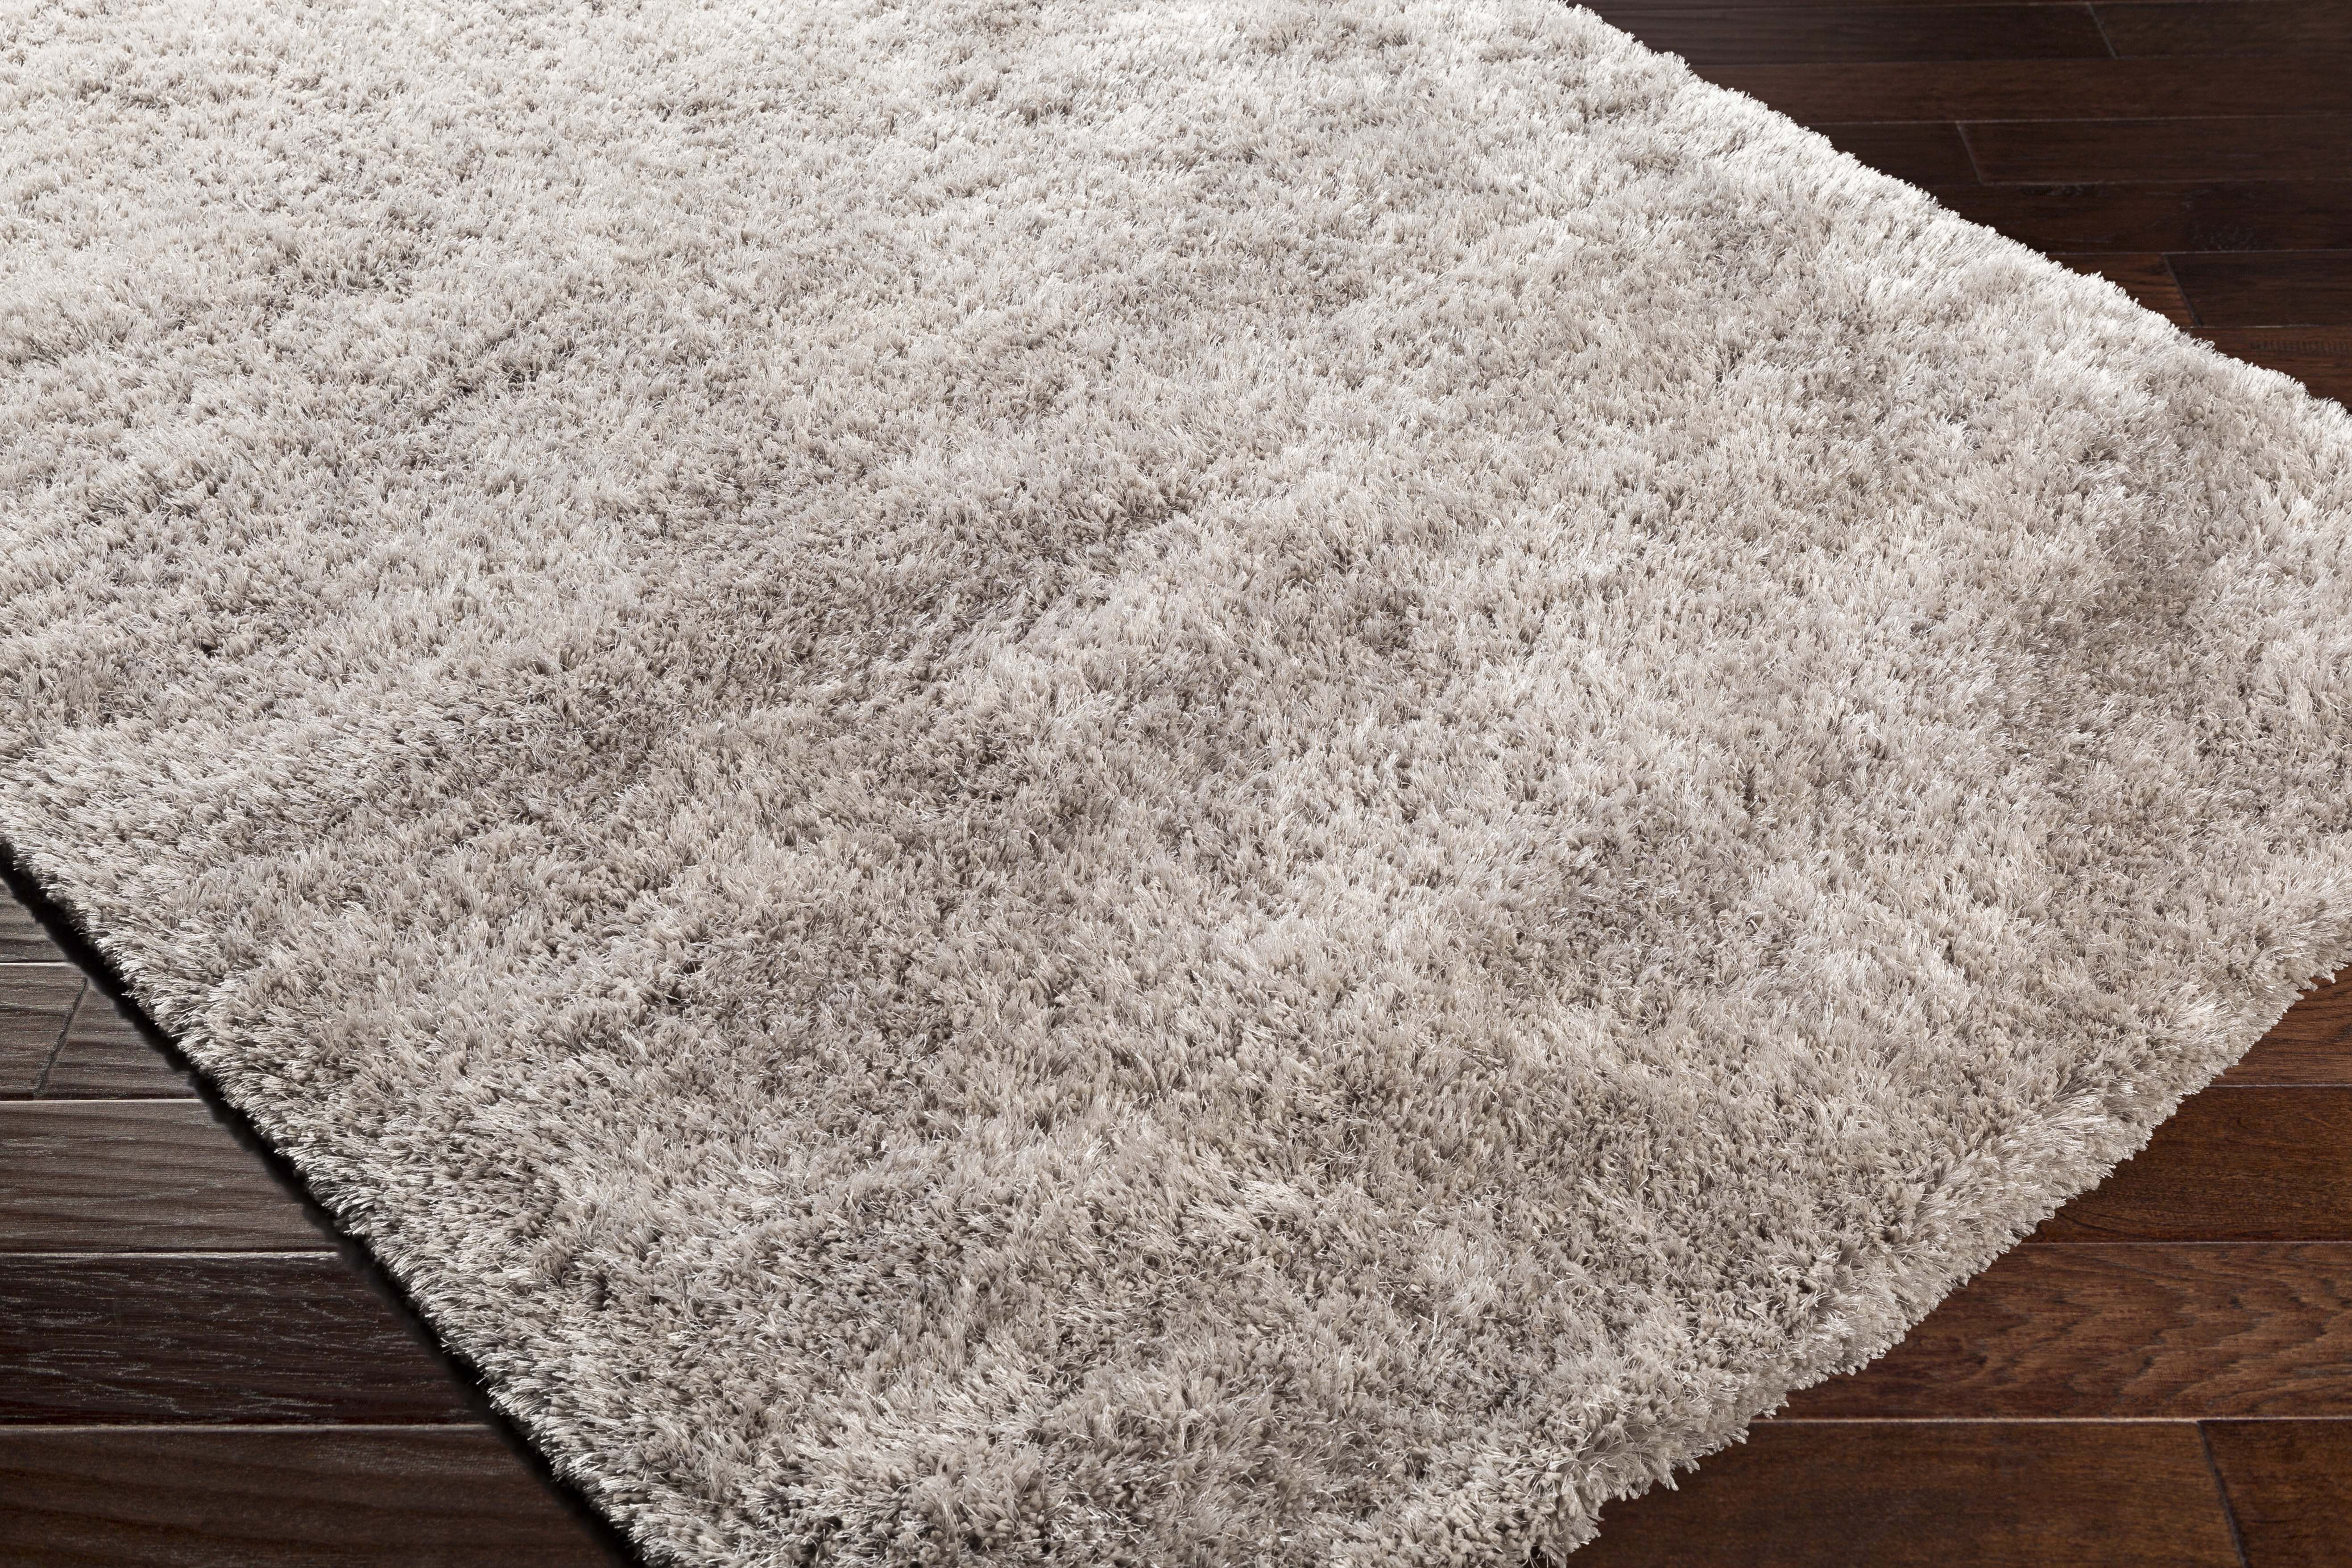 Grizzly Rug, 9' x 12' - Image 6